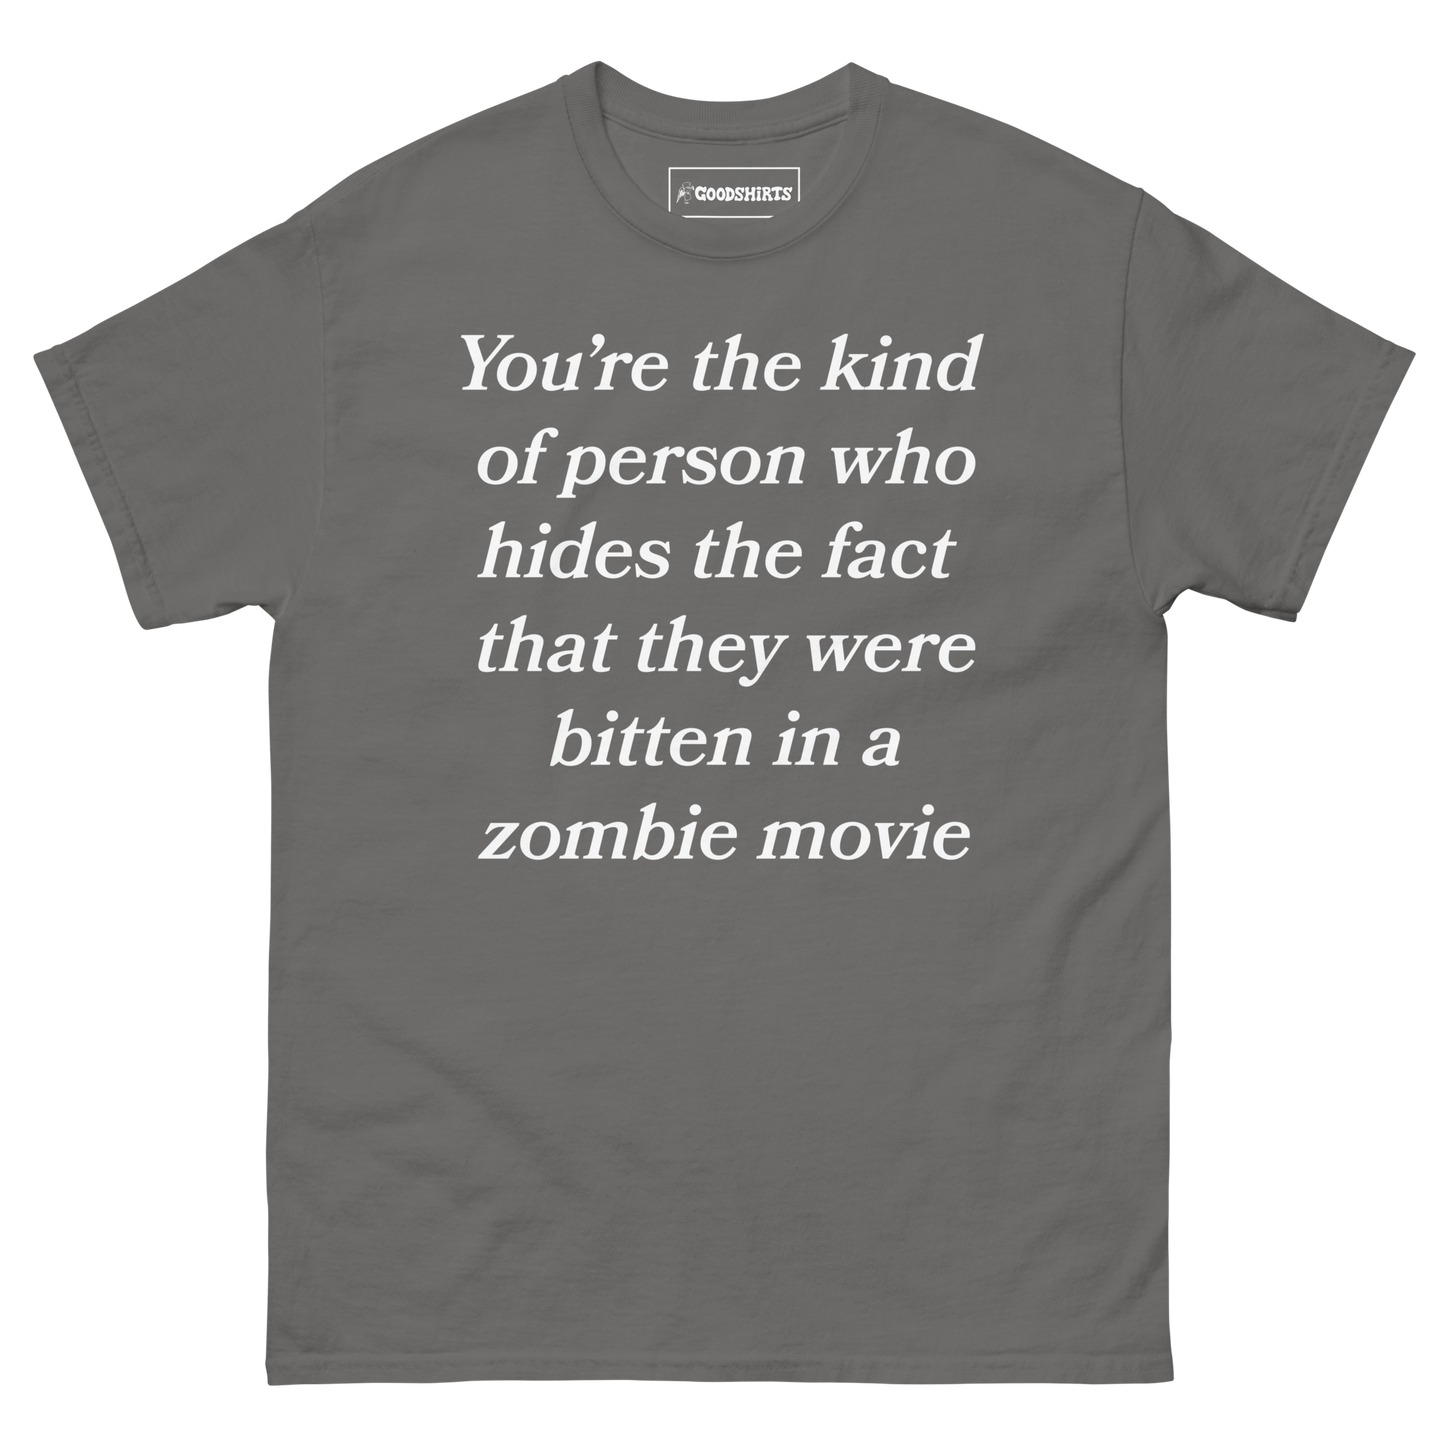 You're The Kind Of Person Who Hides The Fact They Were Bitten In A Zombie Movie.